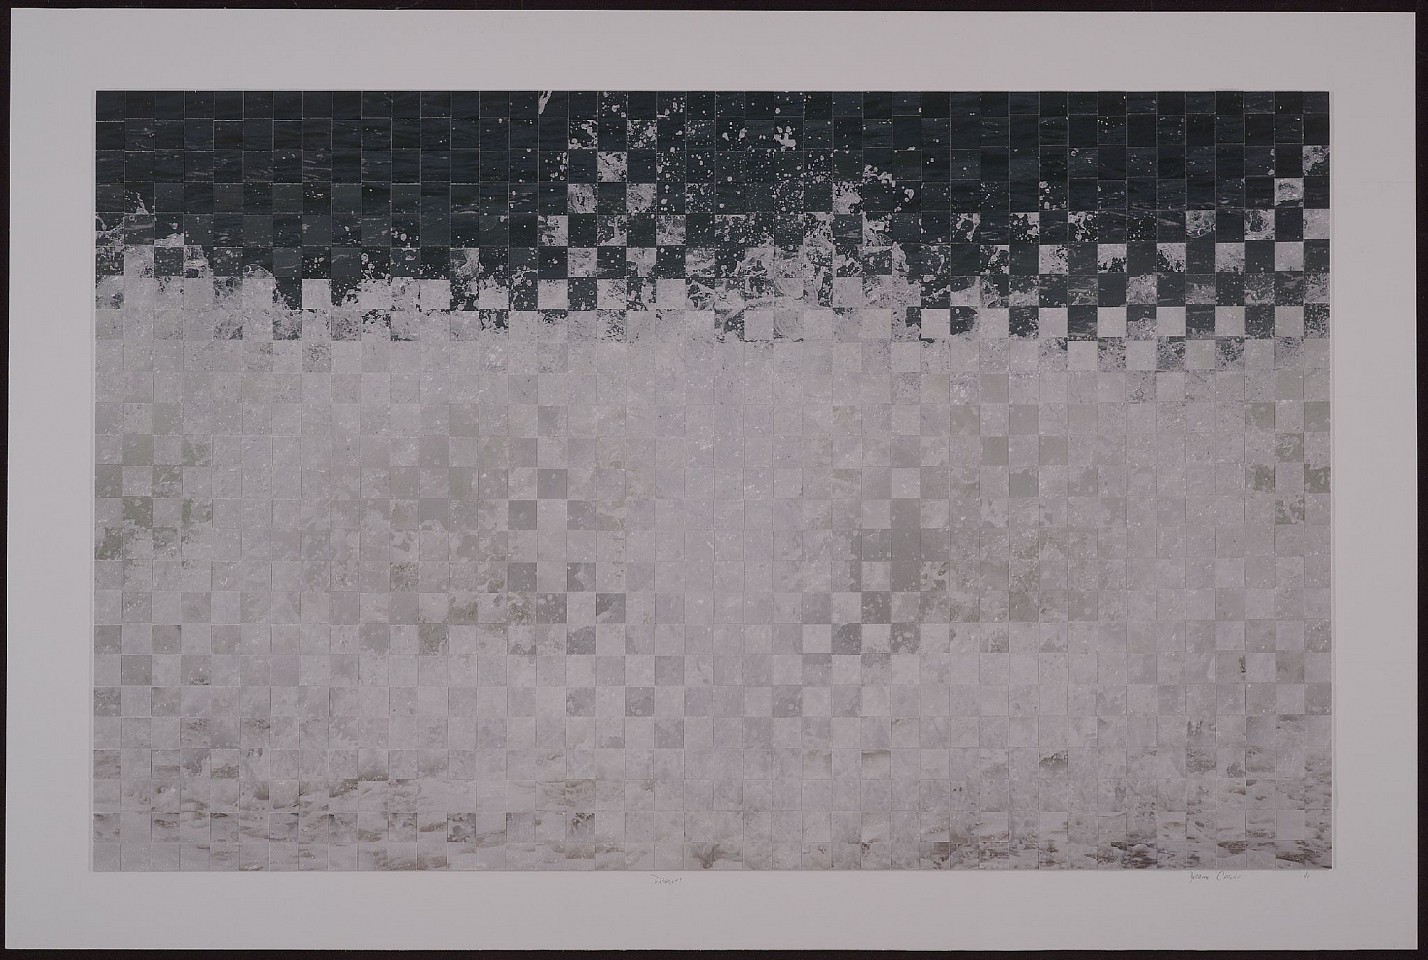 Debranne Cingari (PHOTOGRAPHY), Droplets, 2020
Handcrafted Weaved Canson Archival Photograph, 26 1/2 x 42 in. (67.3 x 106.7 cm)
DC200701